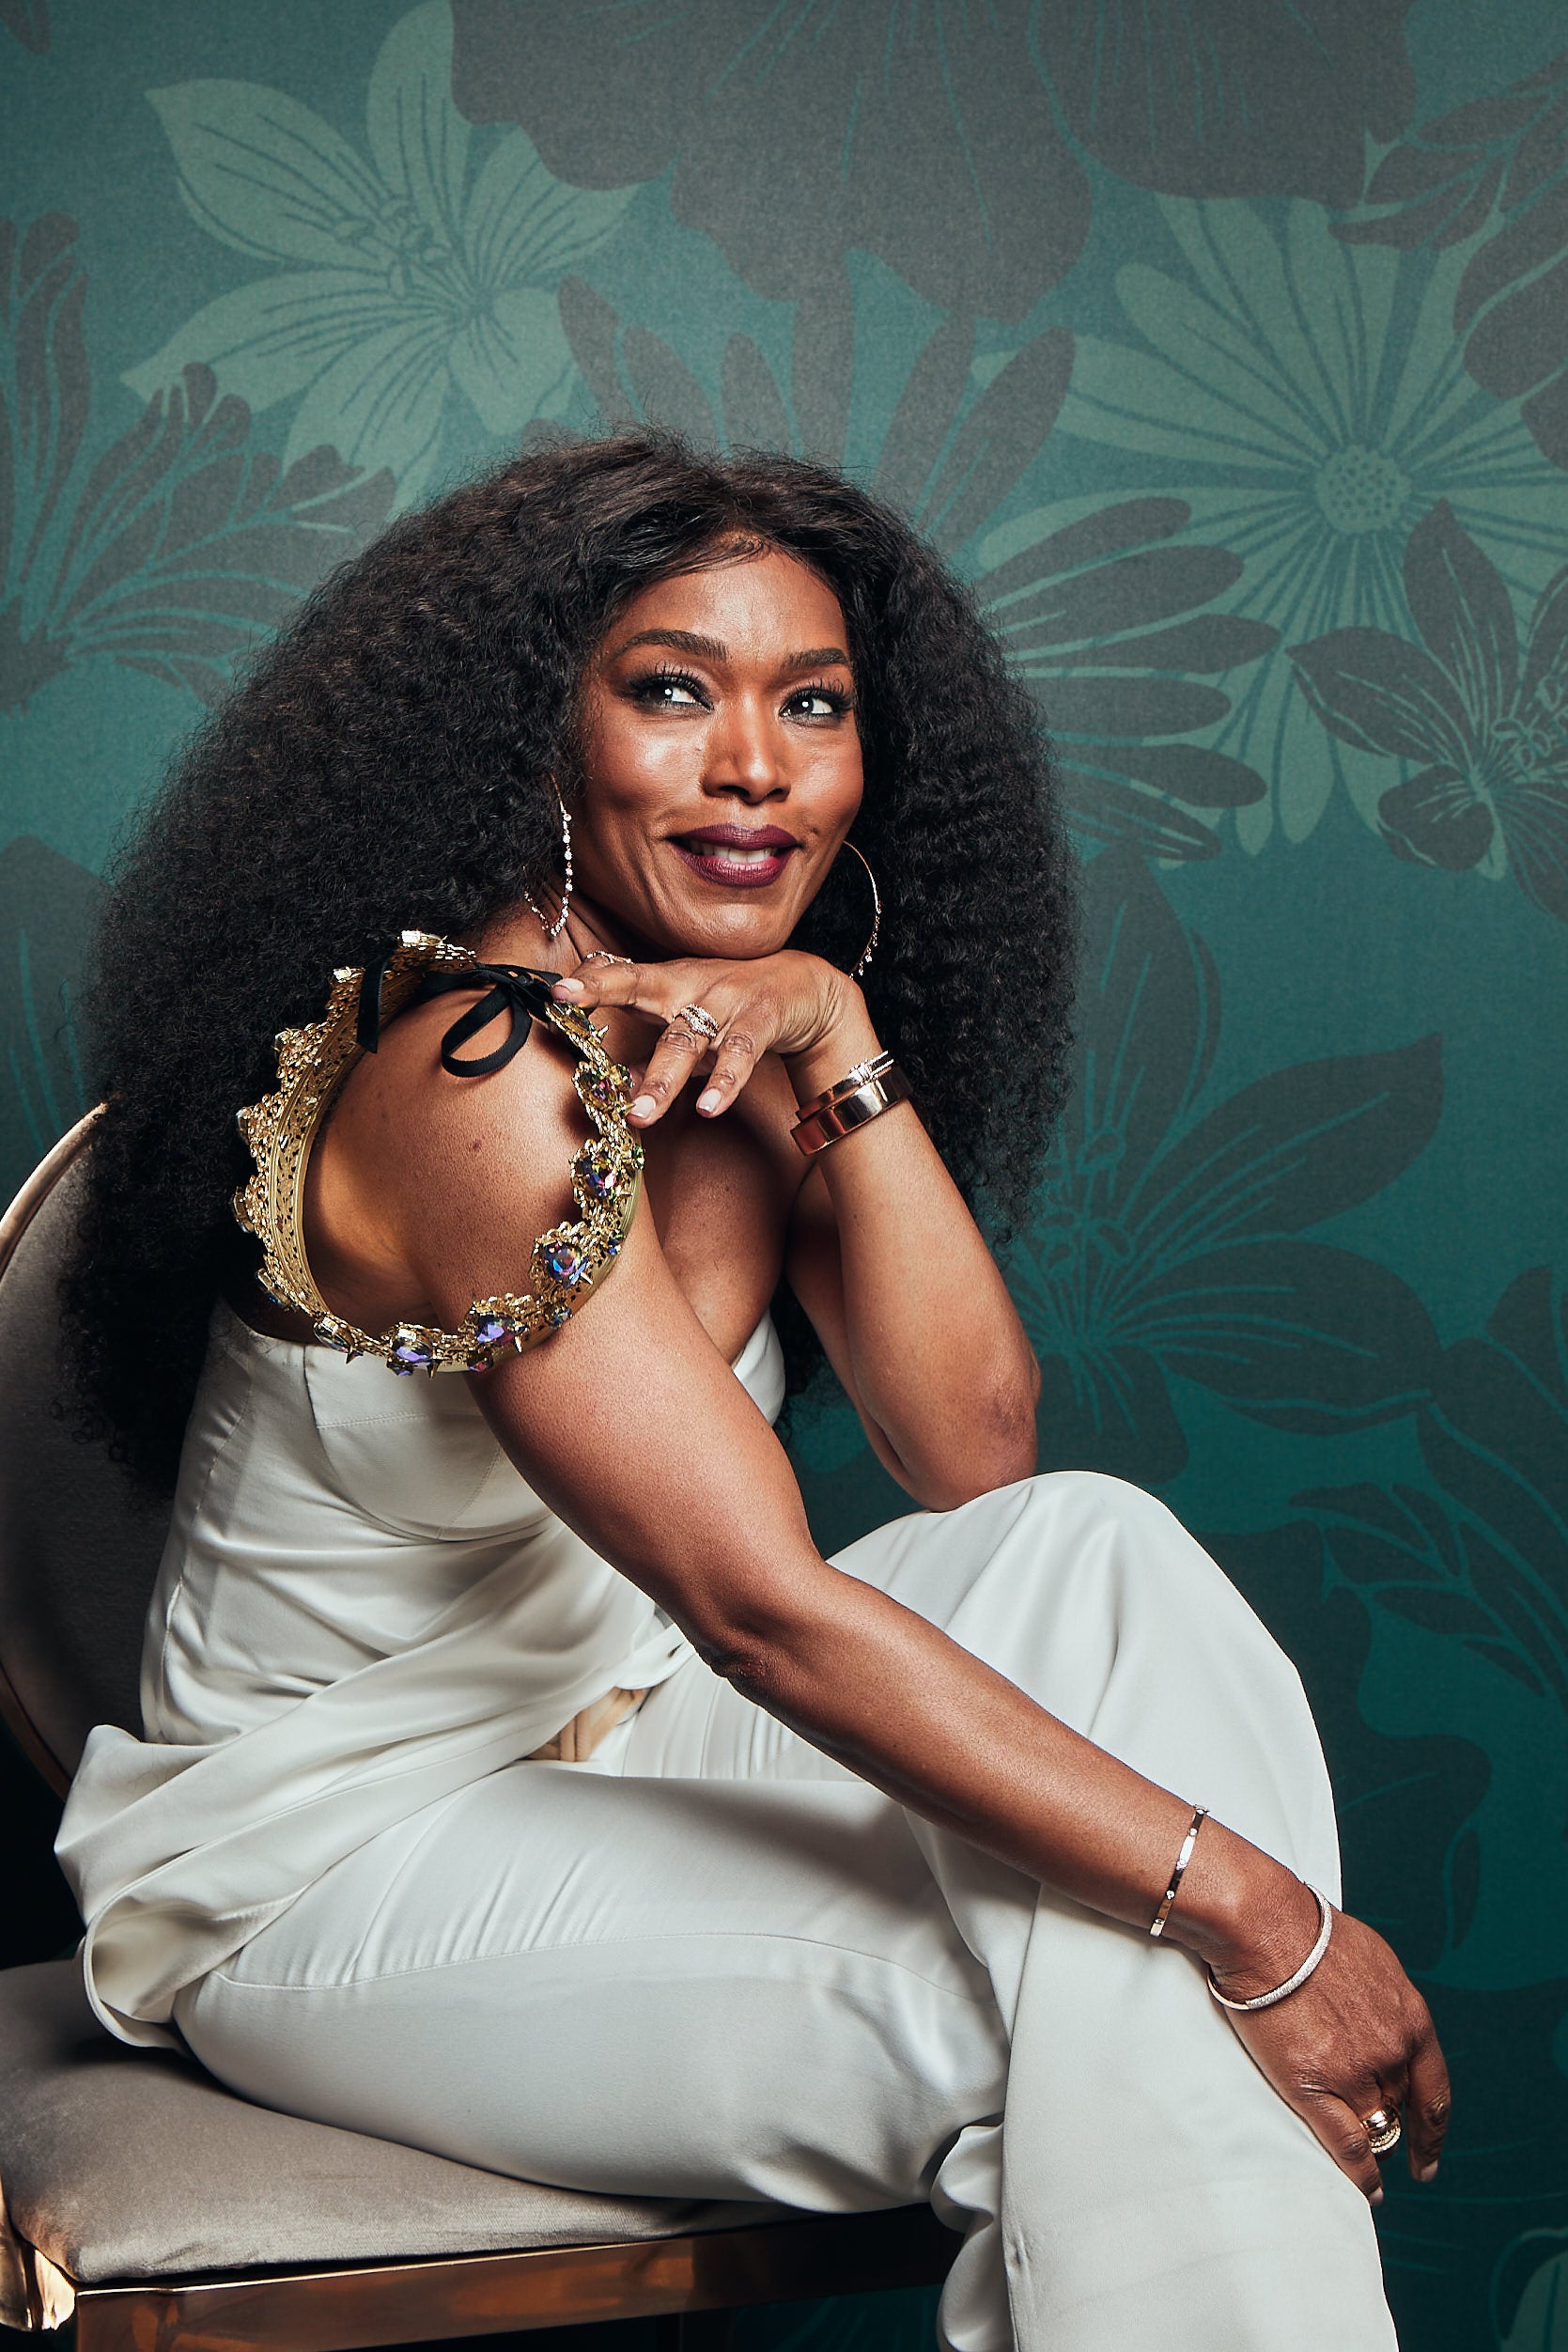 'What’s Love Got To Do With It?' Everything! A Love Letter To Angela Bassett On Her 60th Birthday